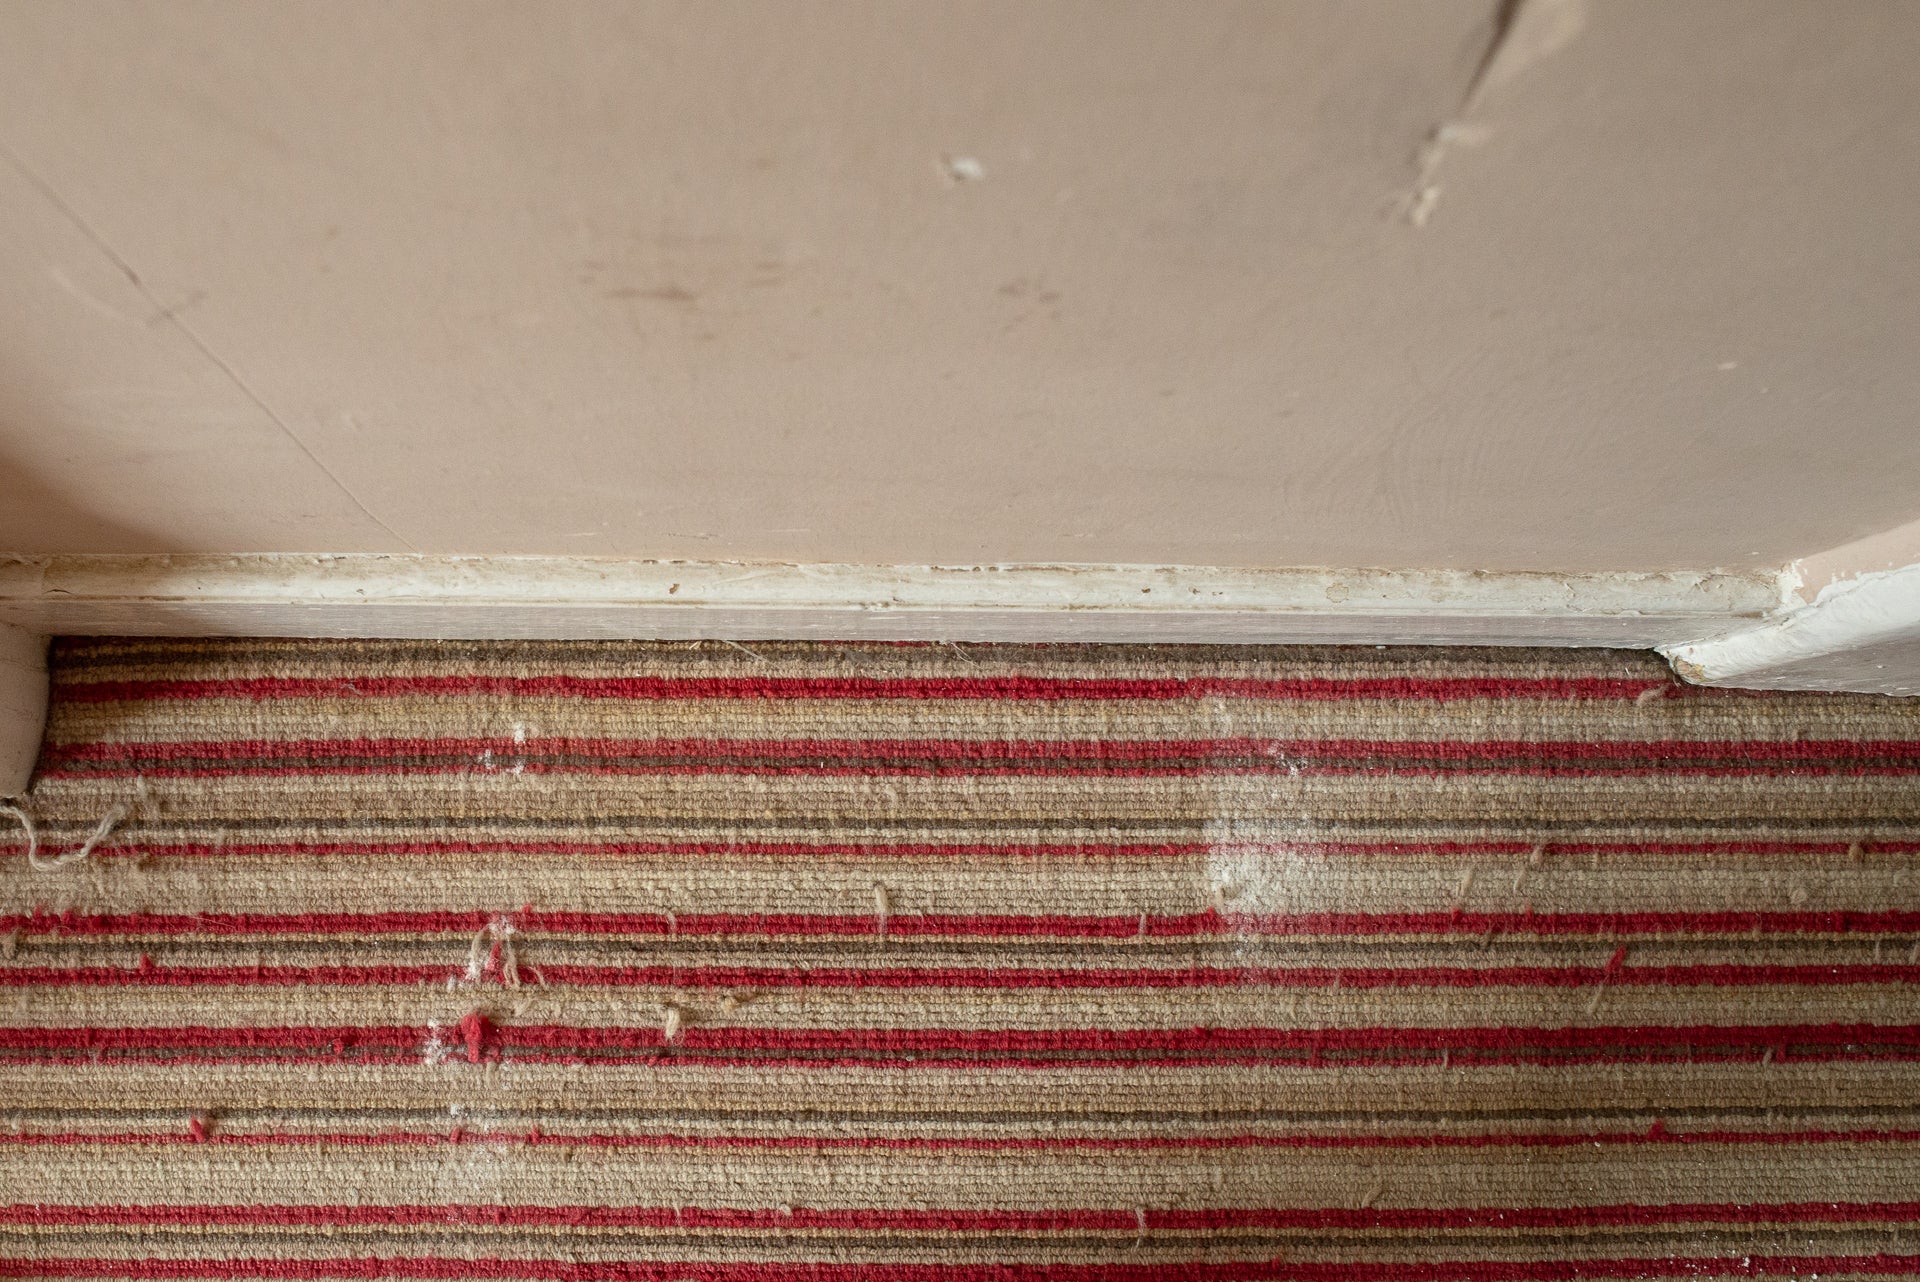 Dusty skirting board above striped carpet.